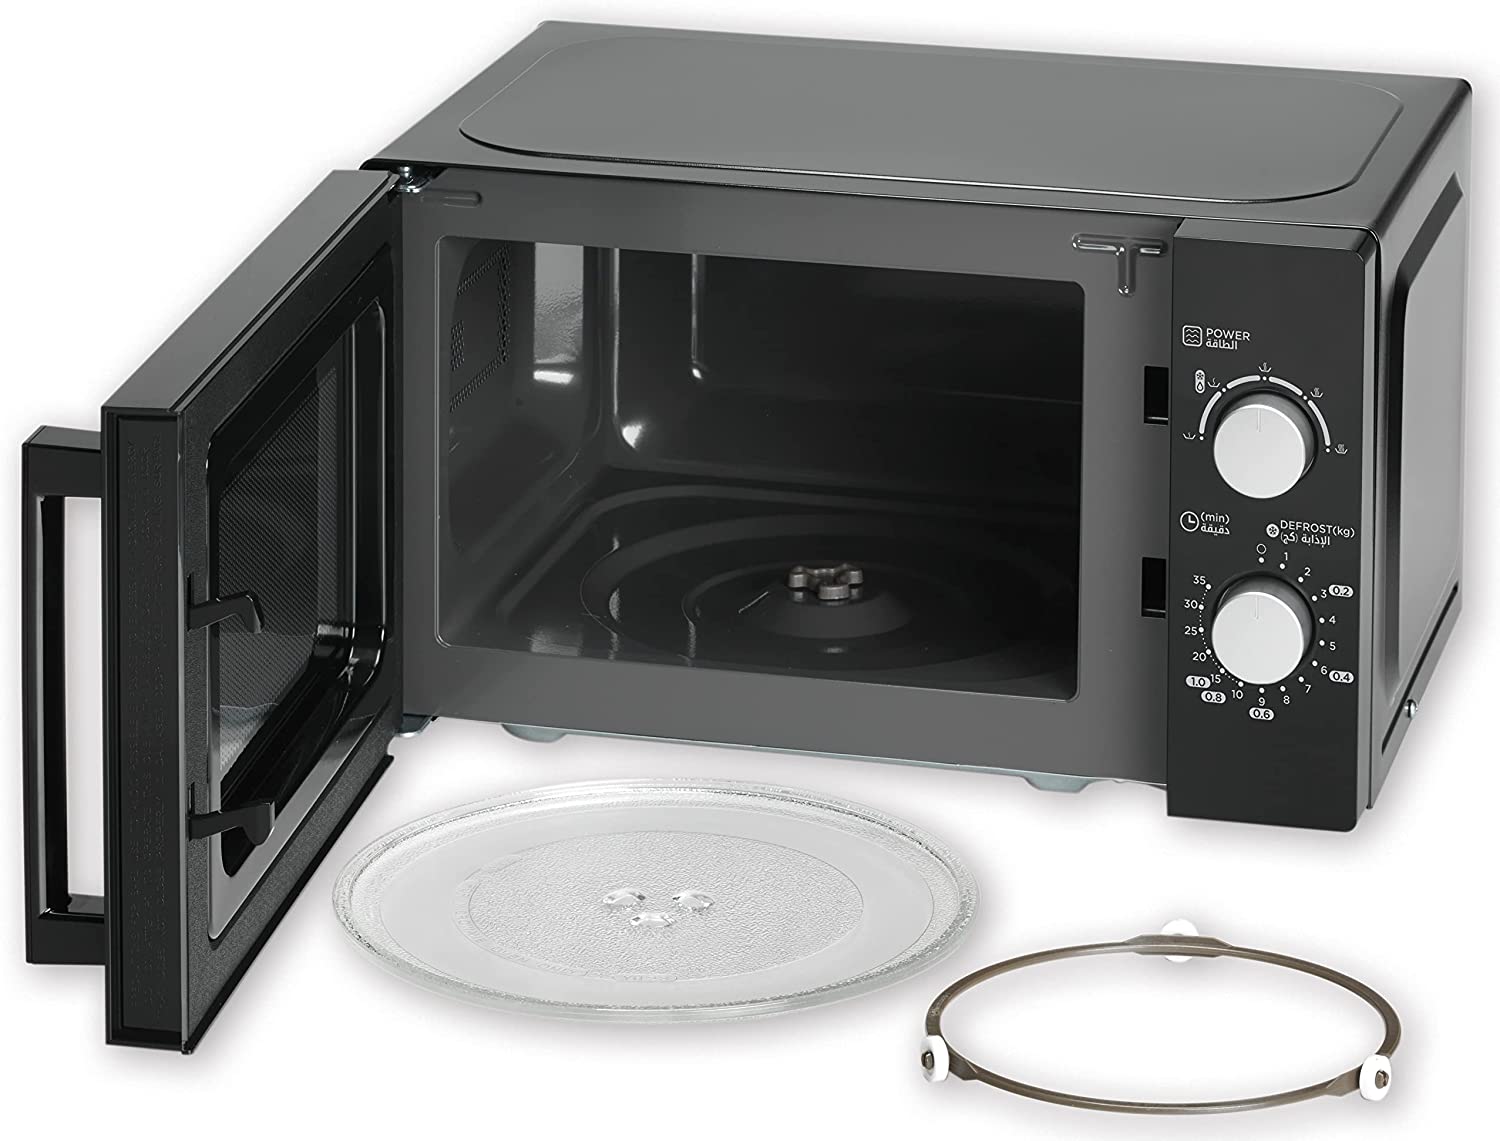 KENWOOD 20L MICROWAVE OVEN WITH DEFROST FUNCTION, 700W, WHITE - MWM20.000WH